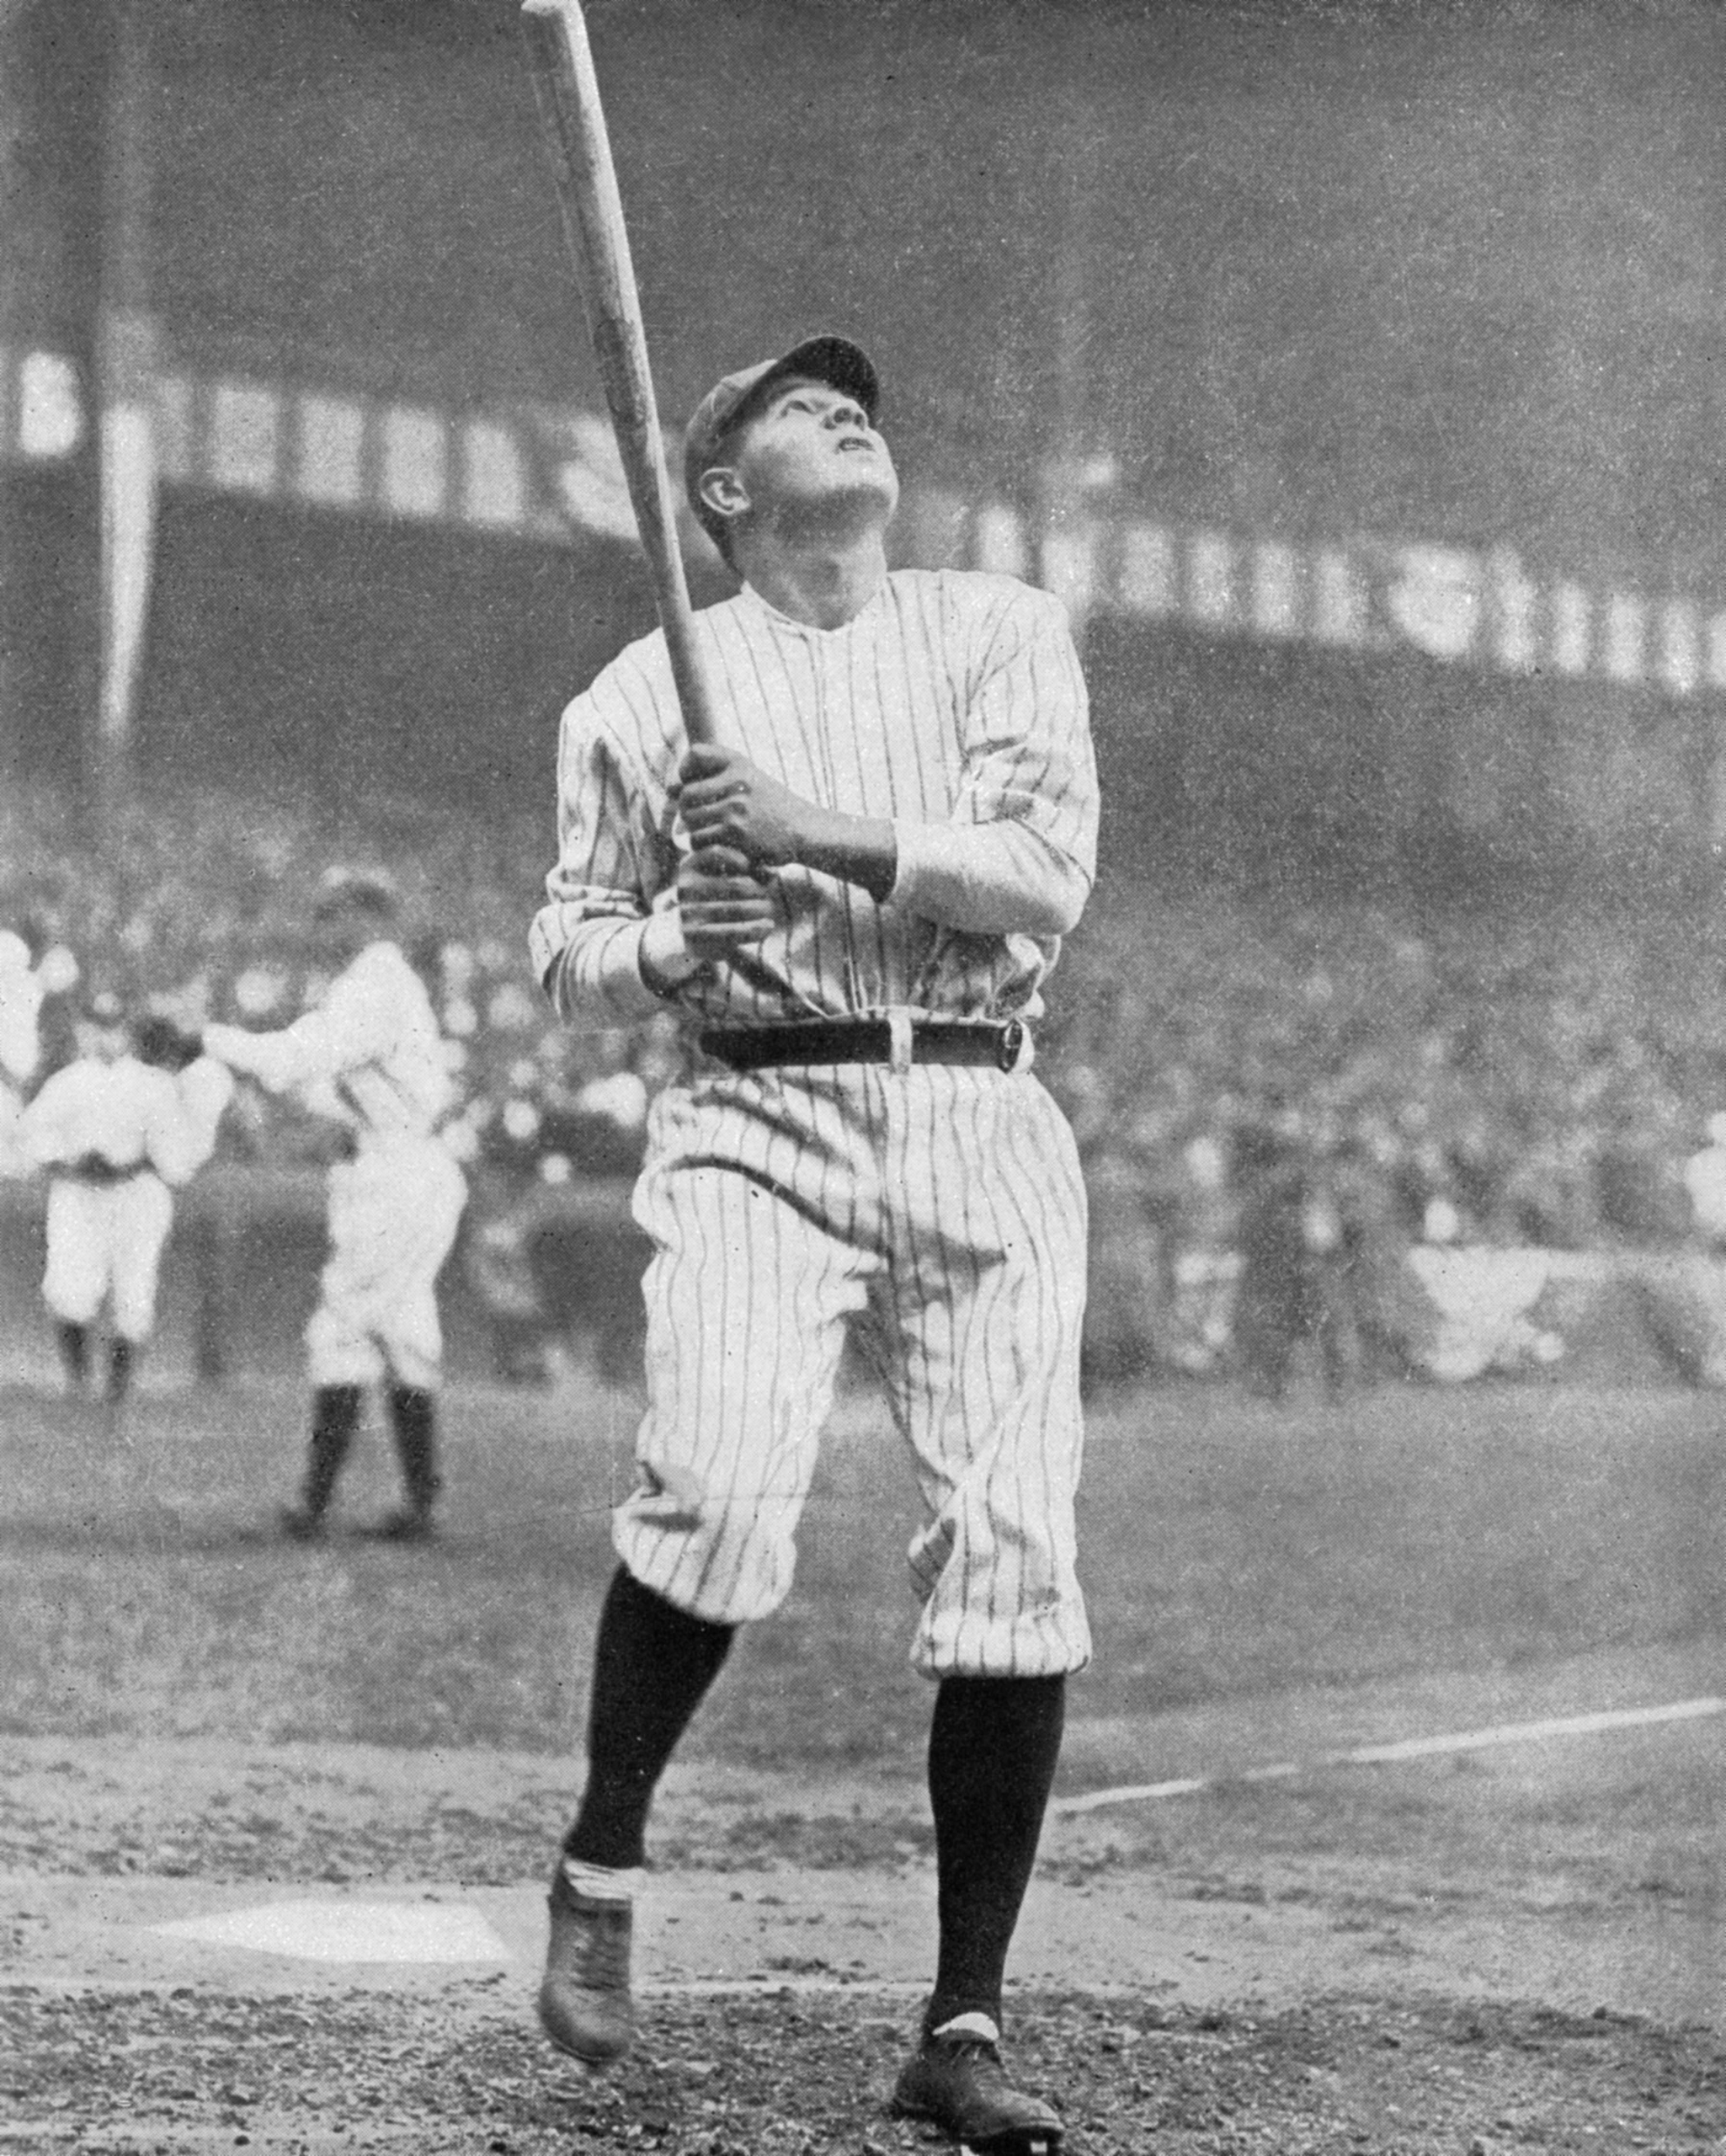 May 21, 1930 Babe Ruth first to hit three home runs in a game at Shibe Park